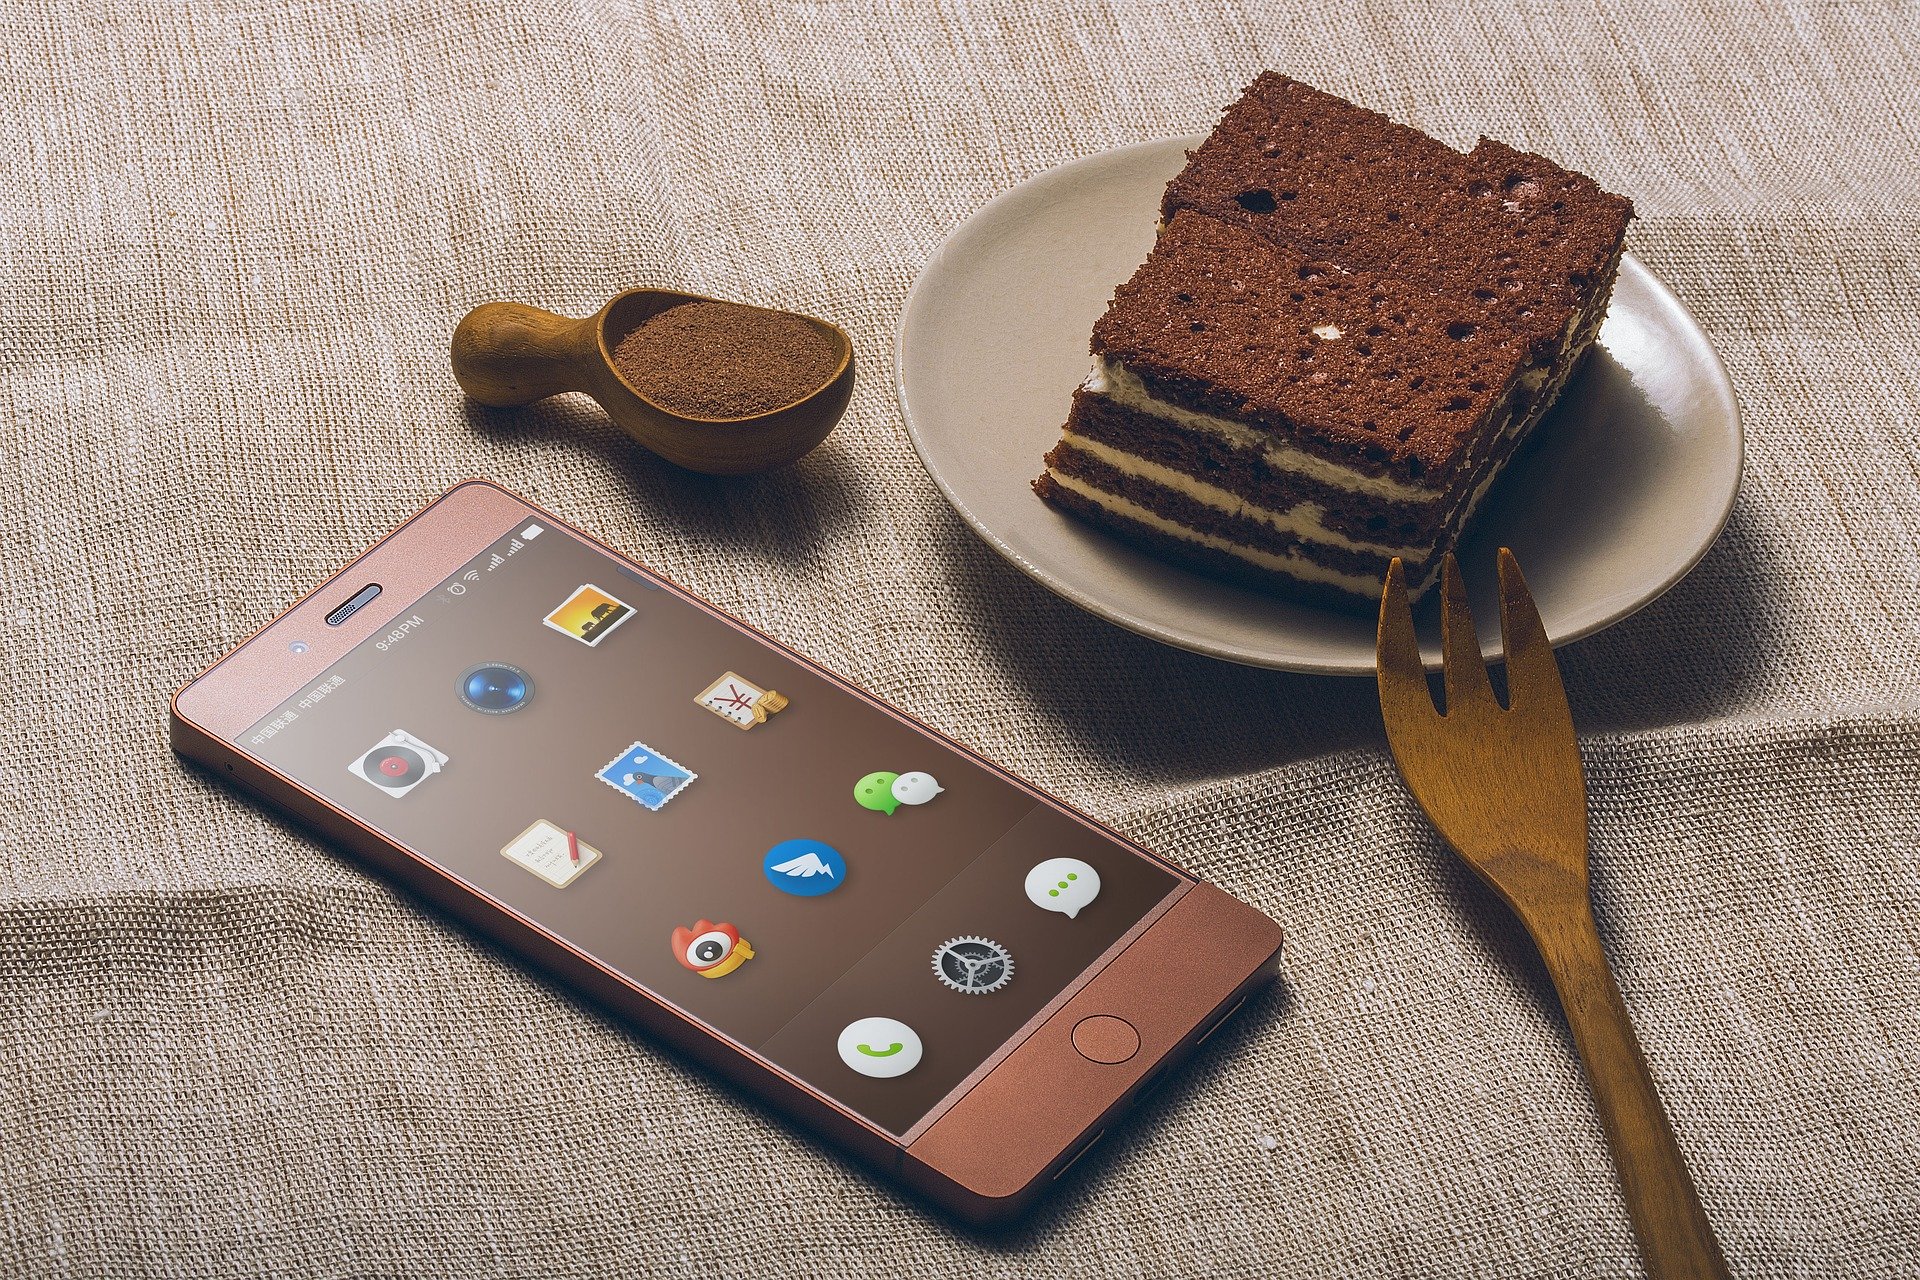 cake - 4 Best Weight Tracking and Weight Loss Apps for iOS and Android